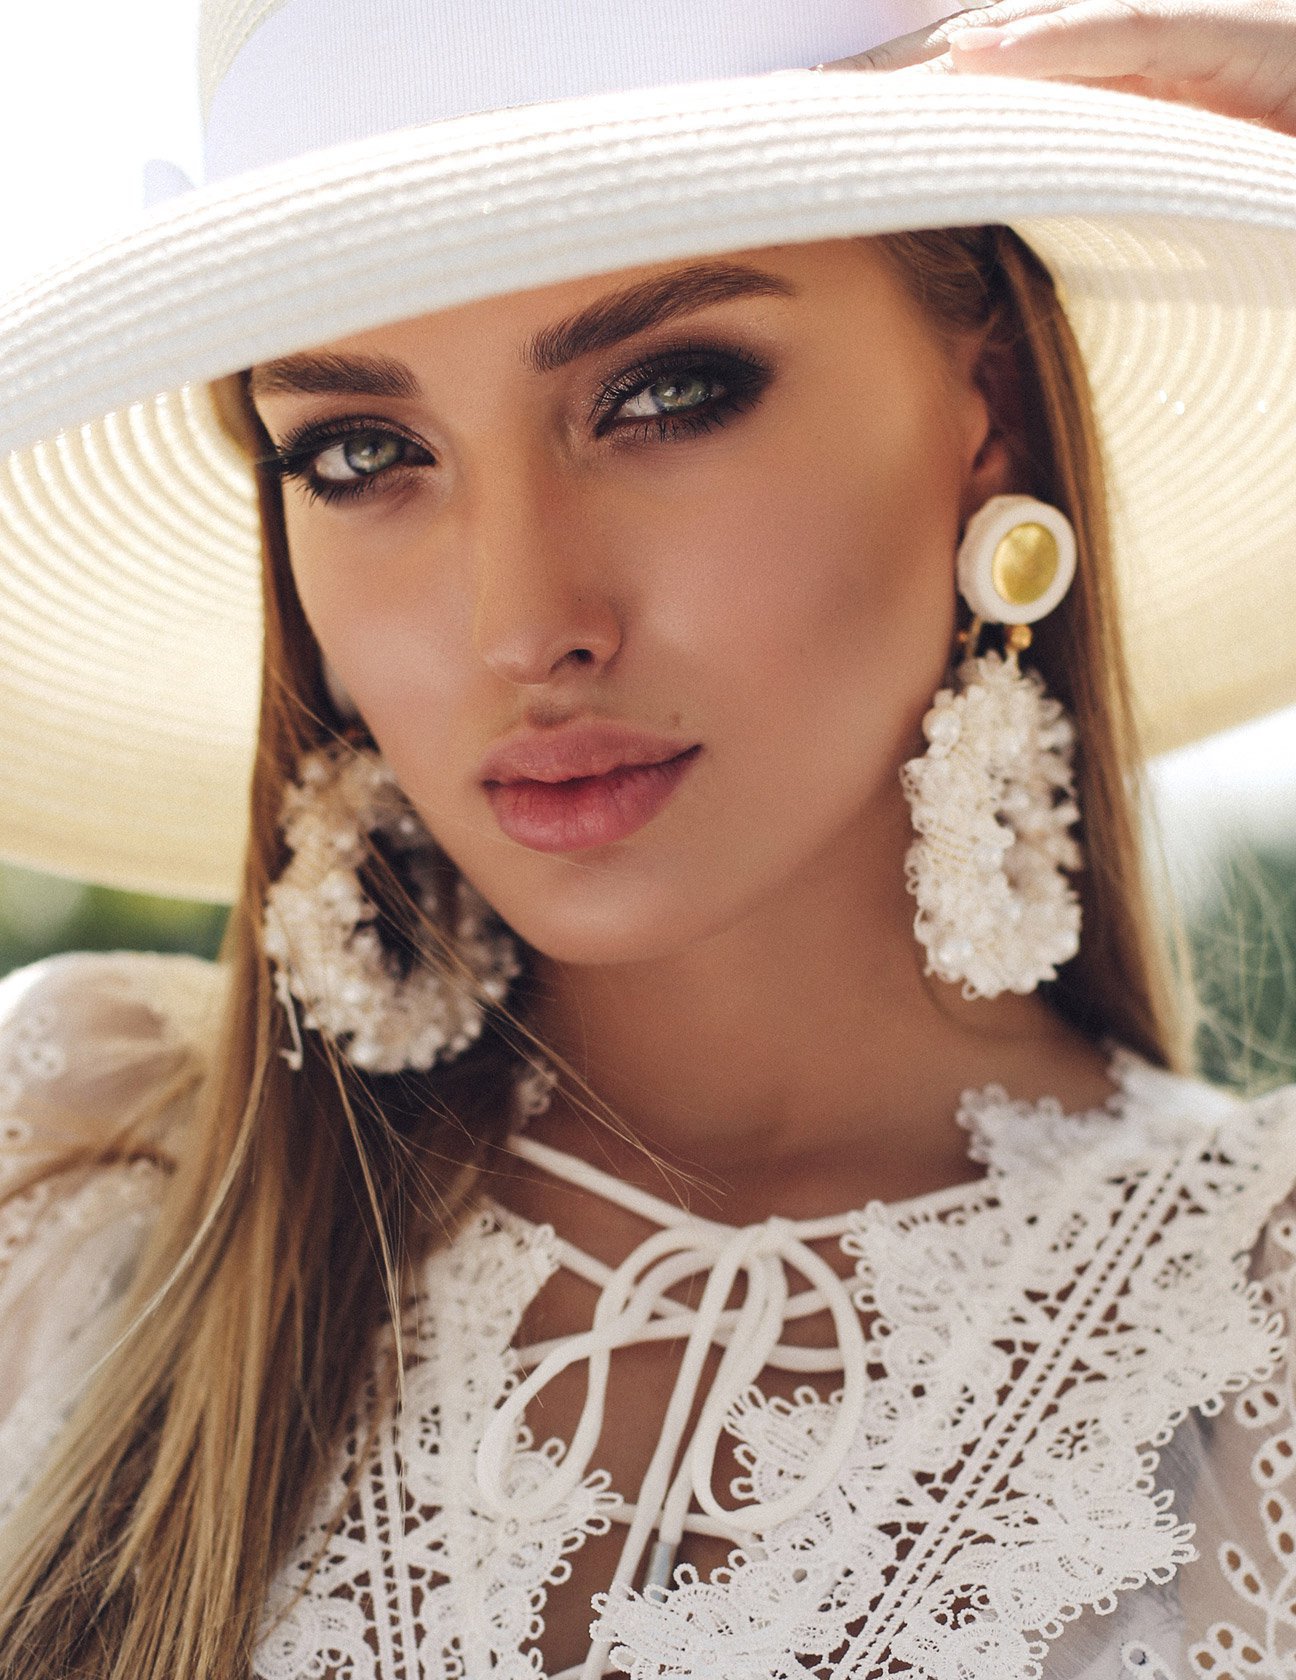 facelift patient model in a white hat and dress